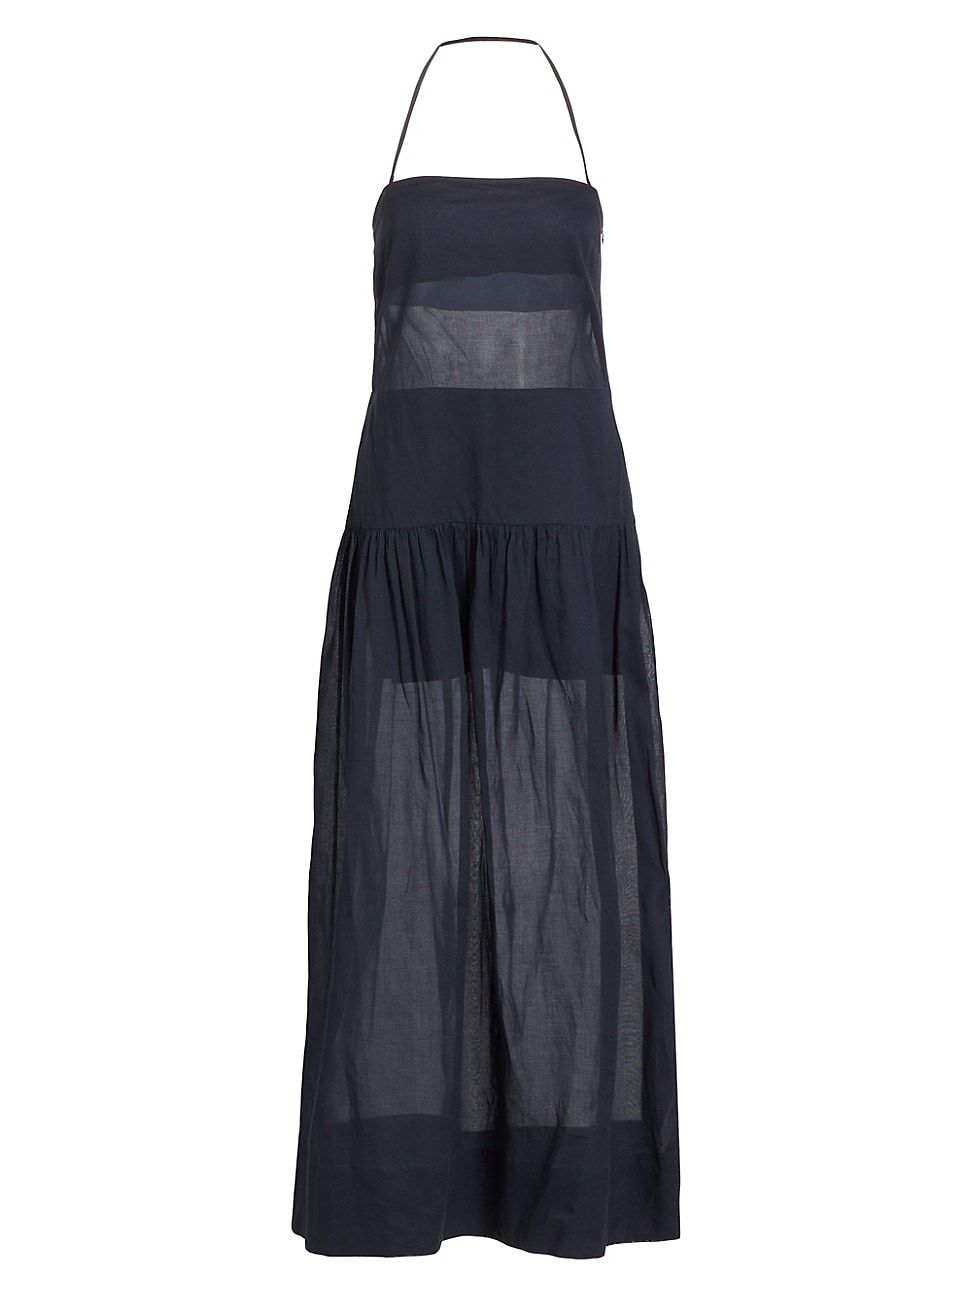 Women's Assemblage Strapless Maxi Dress - Navy - Size 10 | Saks Fifth Avenue